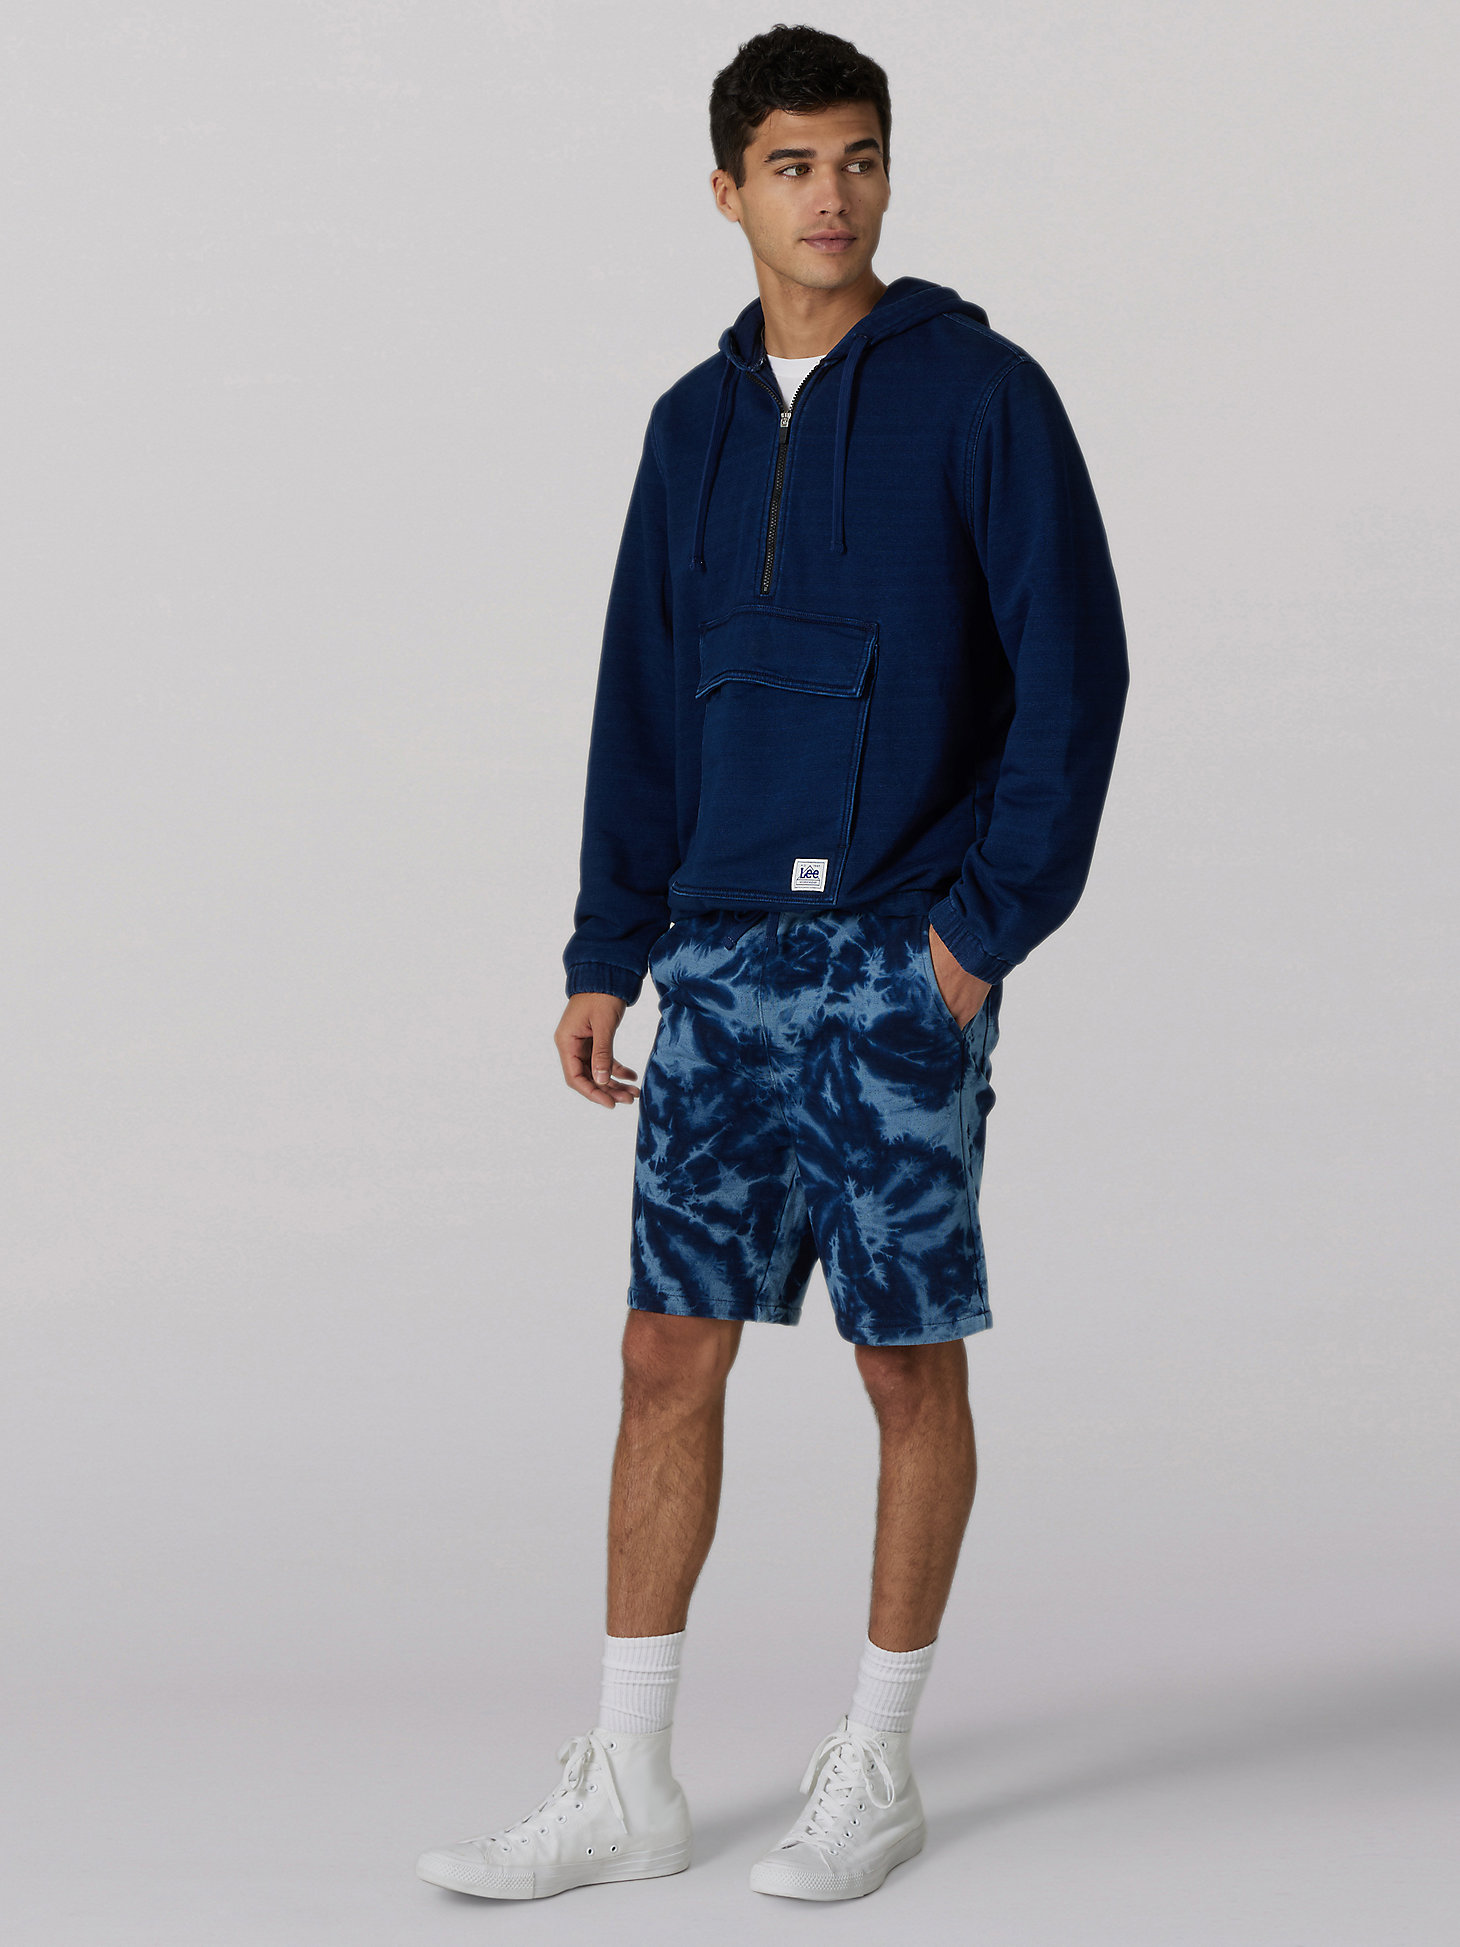 Men's Heritage Leisure Regular Fit Shorts in Bleach Disaster main view